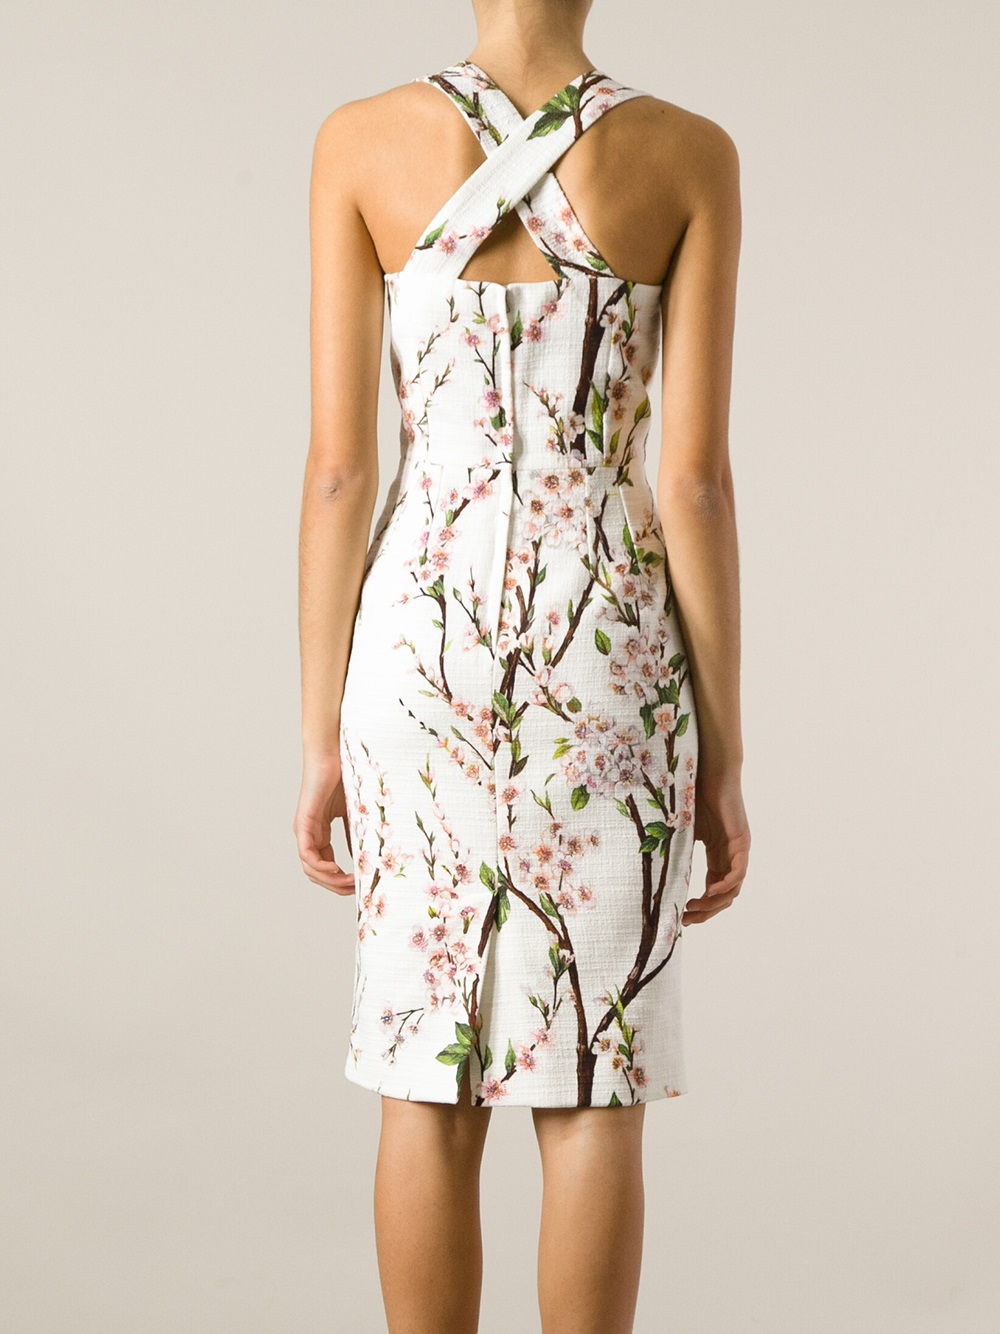 Lyst - Dolce & Gabbana Floral Dress in White